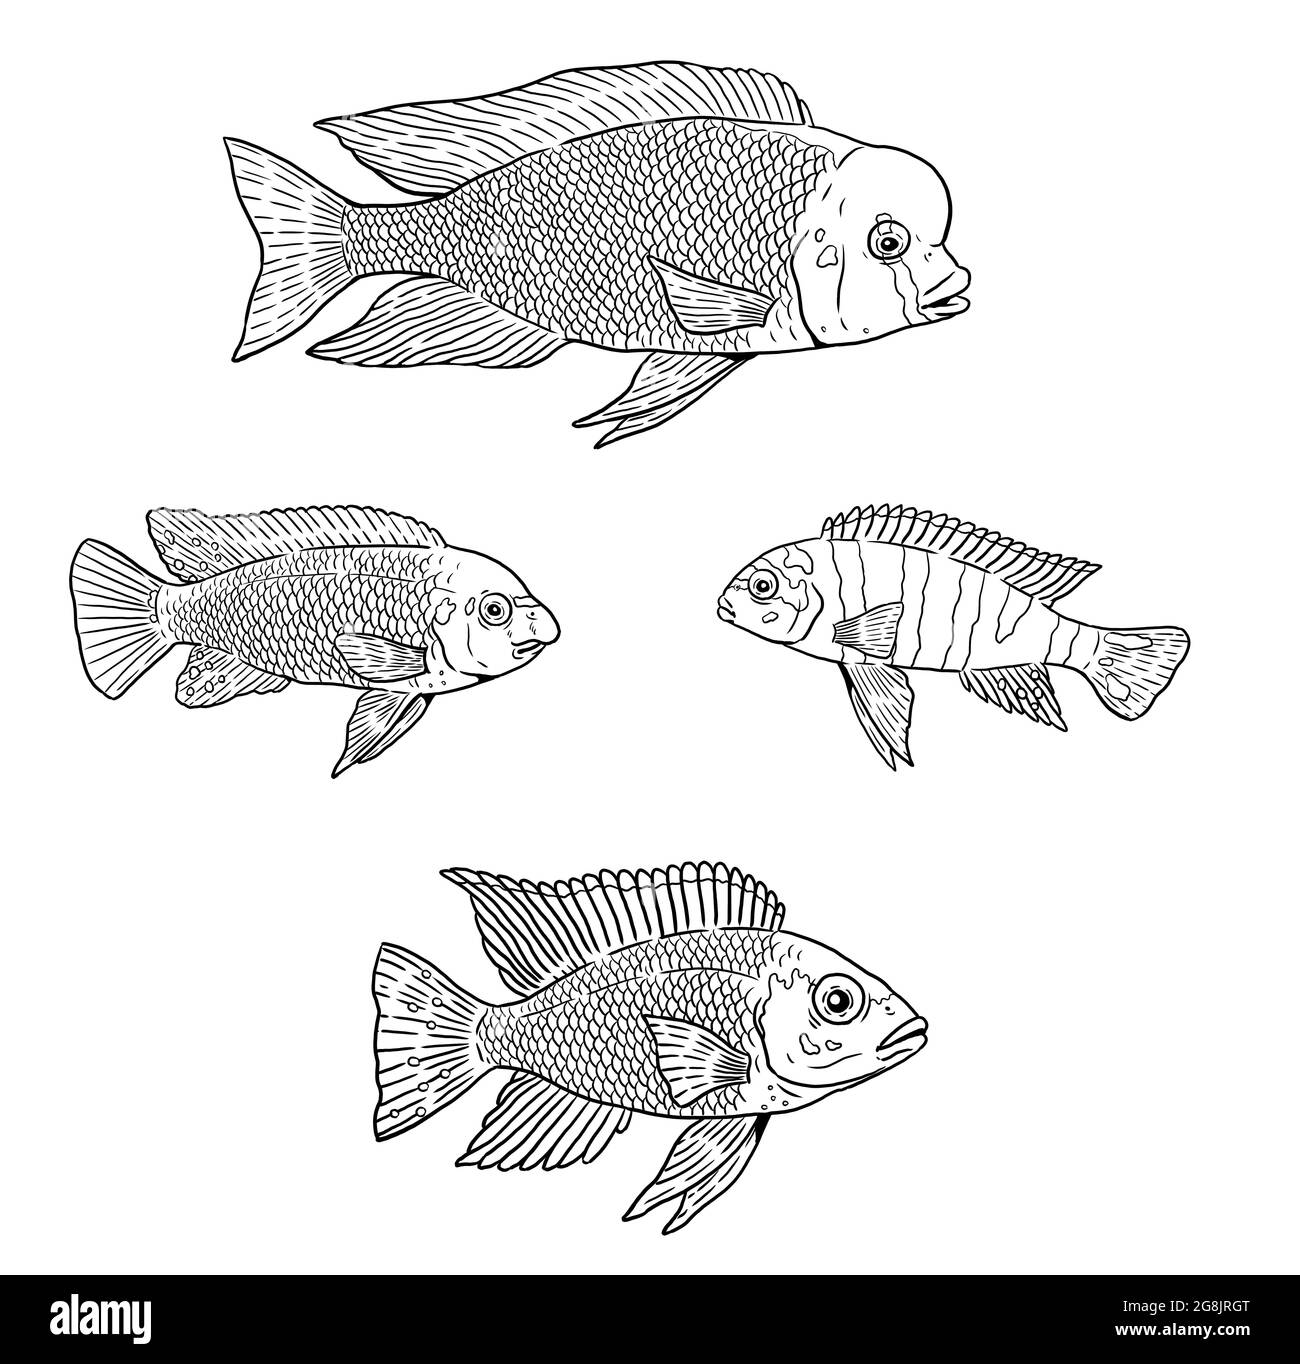 African cichlids from the Malawi lake for coloring. Colorful fish template. Coloring book for children and adults. Stock Photo